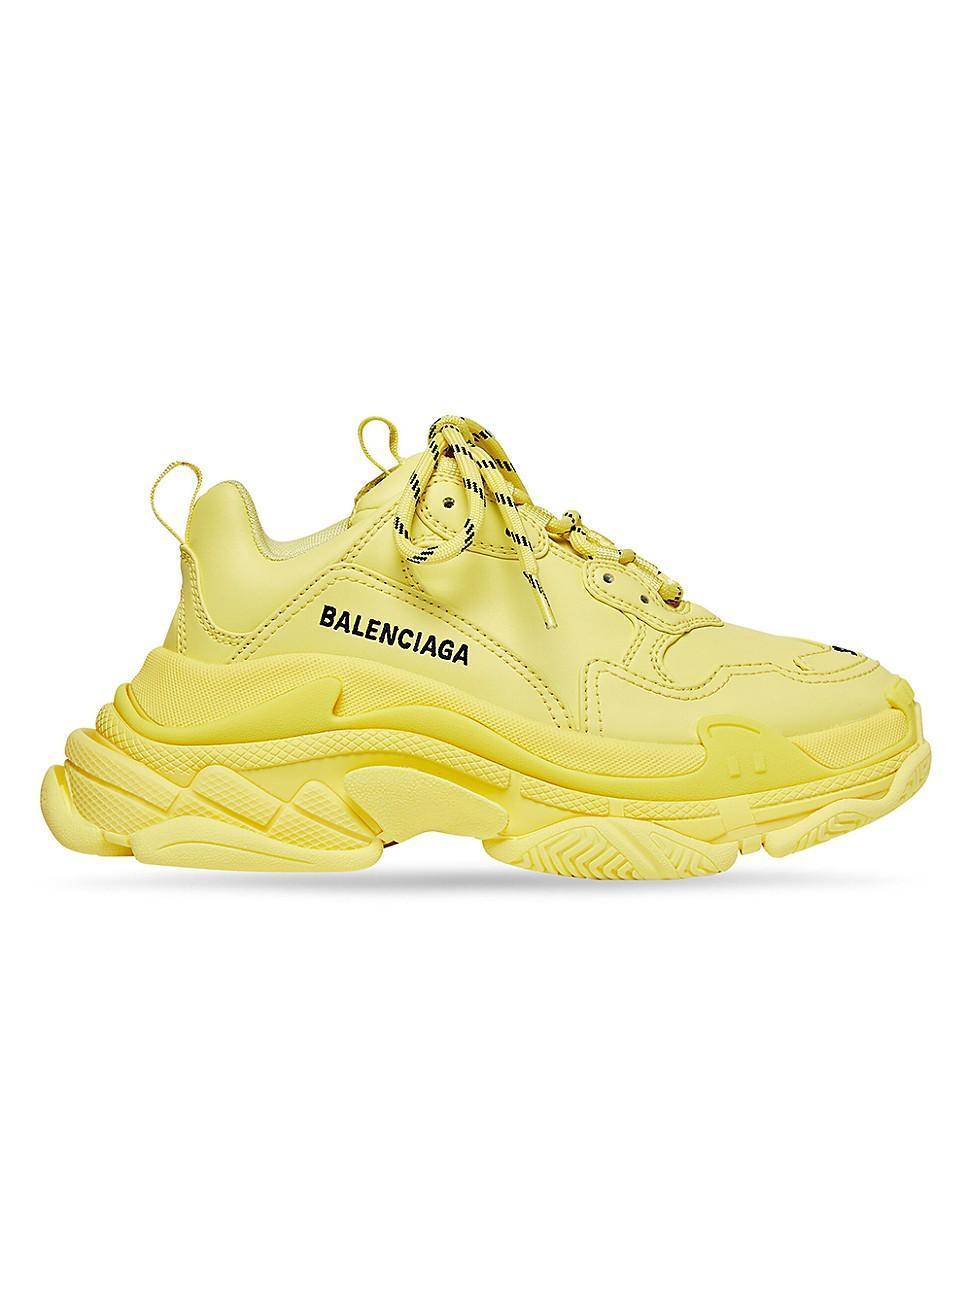 Womens Triple S Sneaker Product Image